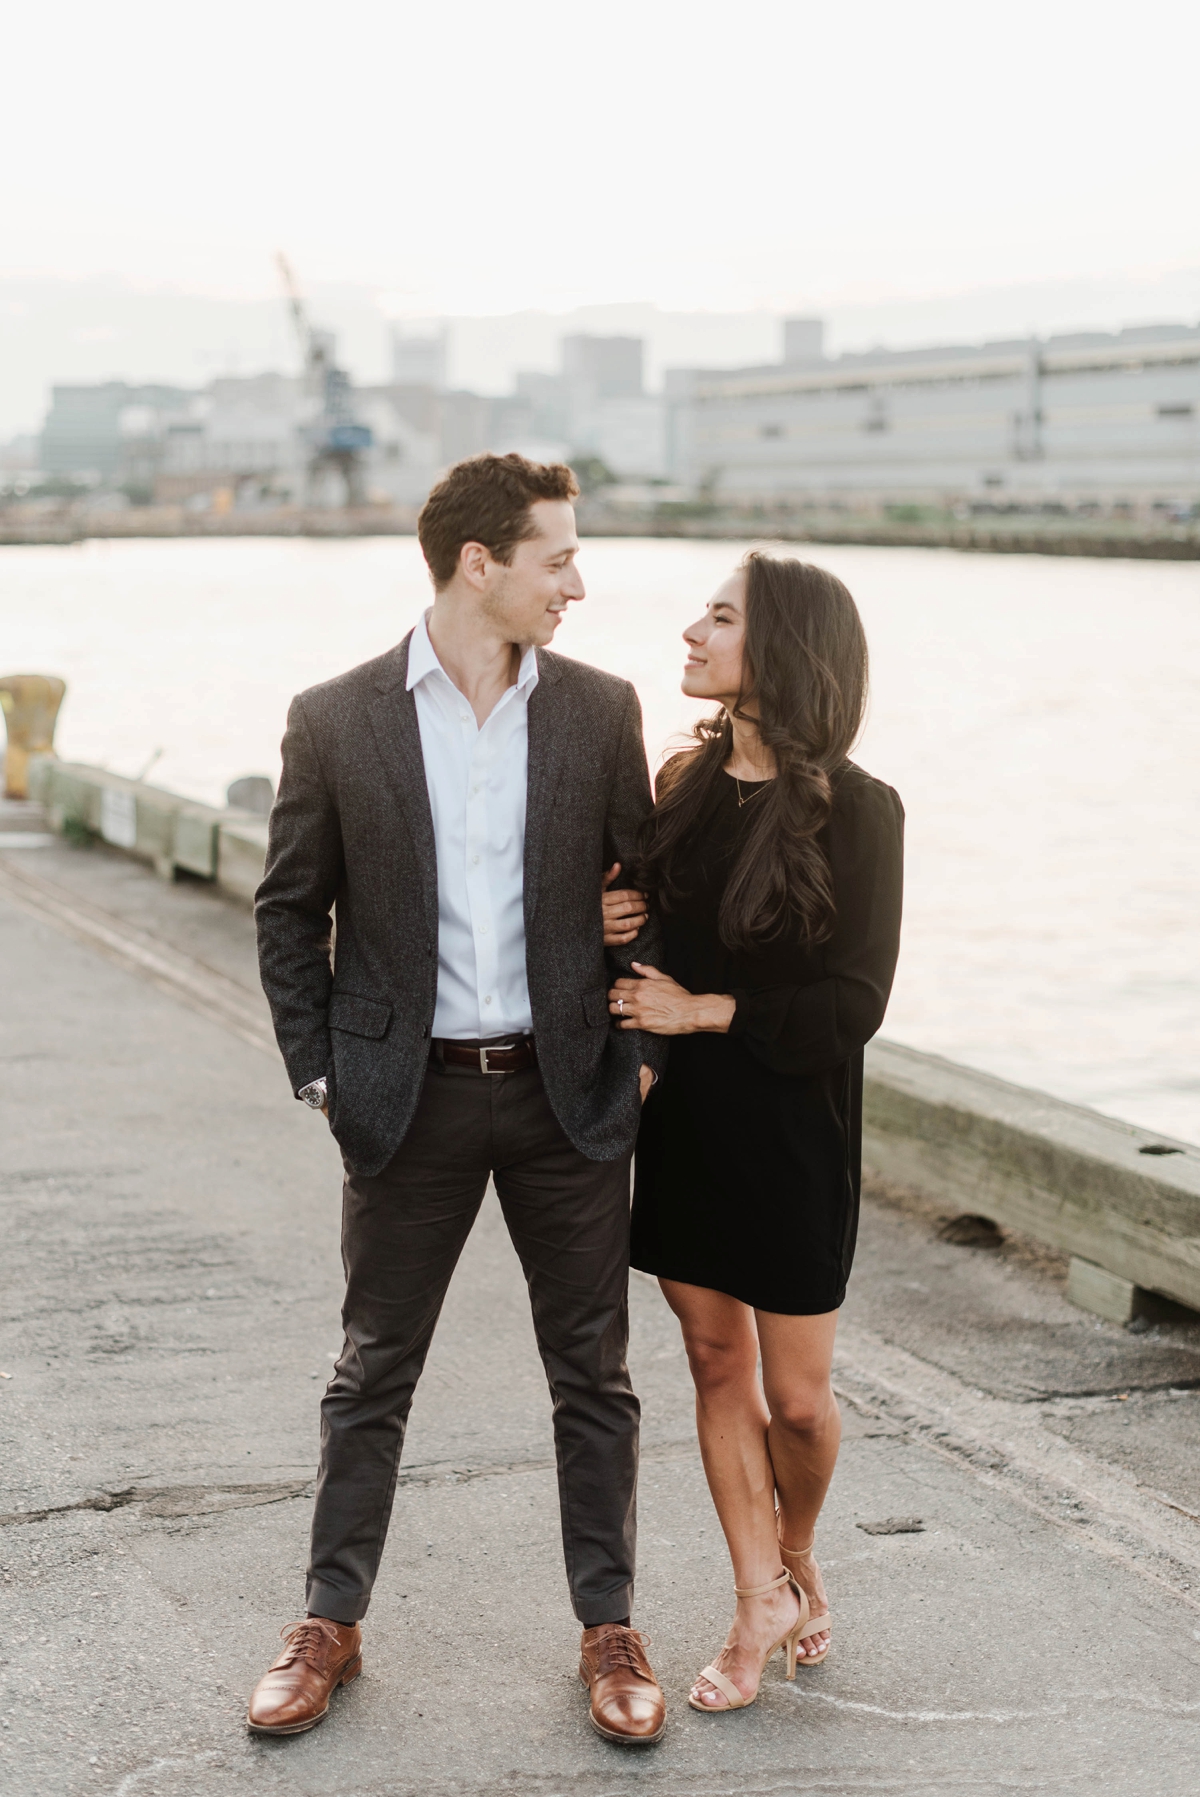 This summer portrait session features a Dry Dock, Boston Engagement Session captured by Boston Wedding Photographer Annmarie Swift